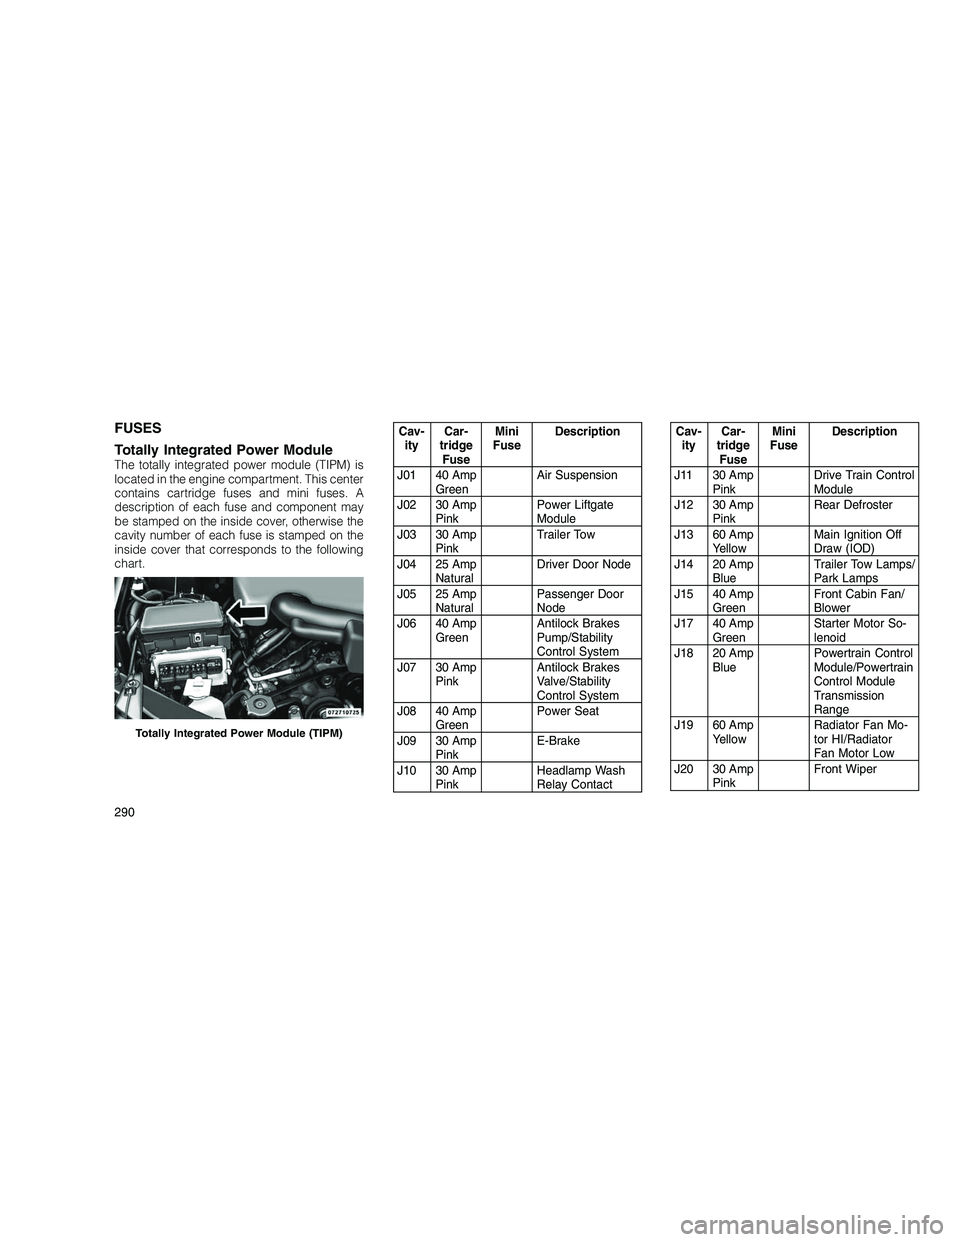 JEEP GRAND CHEROKEE 2010  Owner handbook (in English) 
FUSES
Totally Integrated Power Module
The totally integrated power module (TIPM) is
located in the engine compartment. This center
contains cartridge fuses and mini fuses. A
description of each fuse 